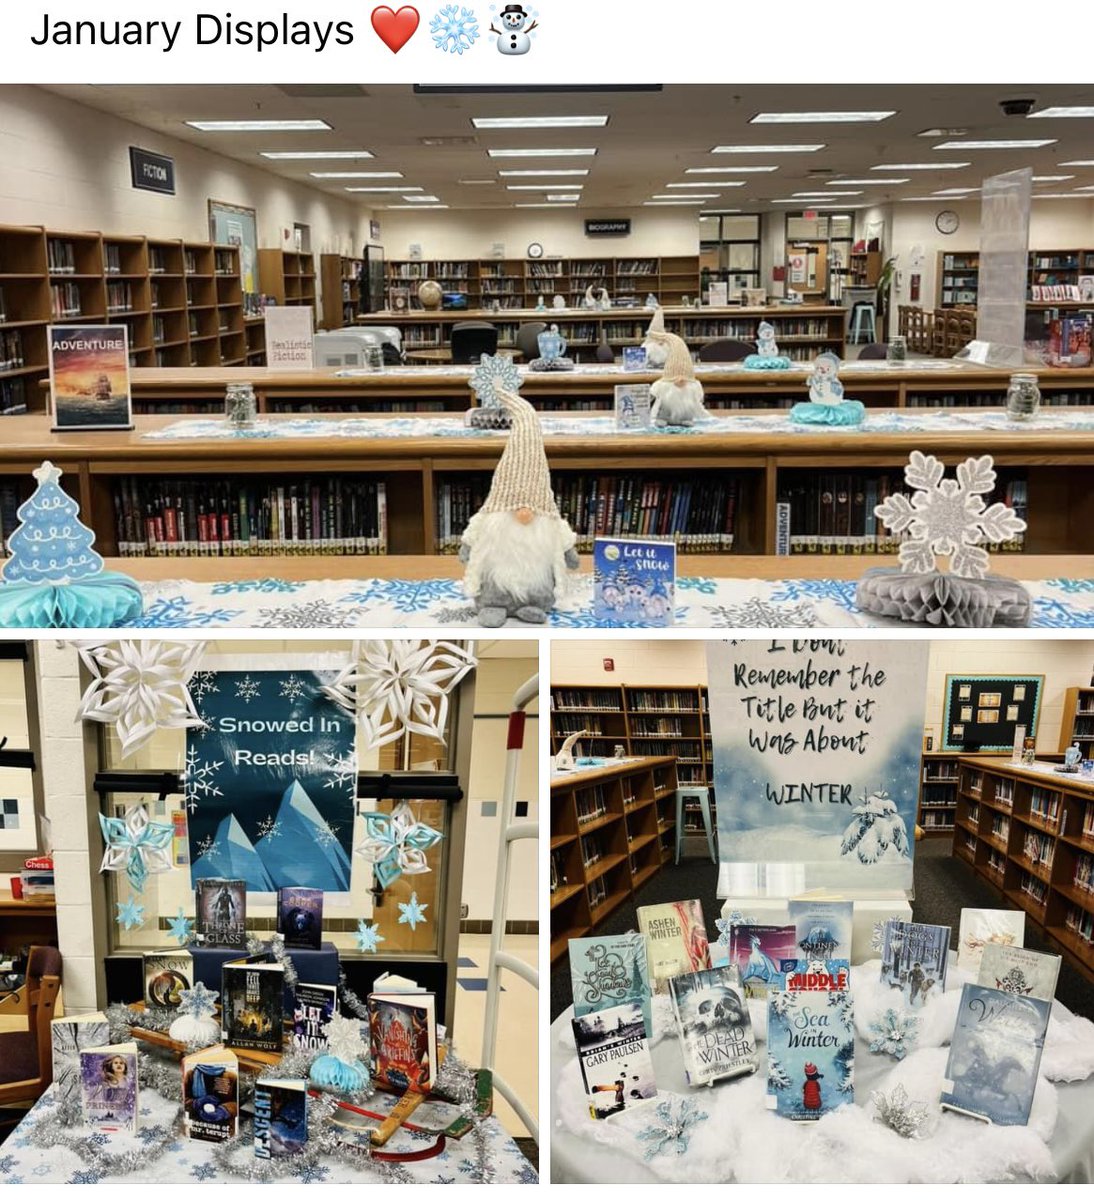 Winter has arrived at the @LunsfordLibrary at @JML_MS_Official